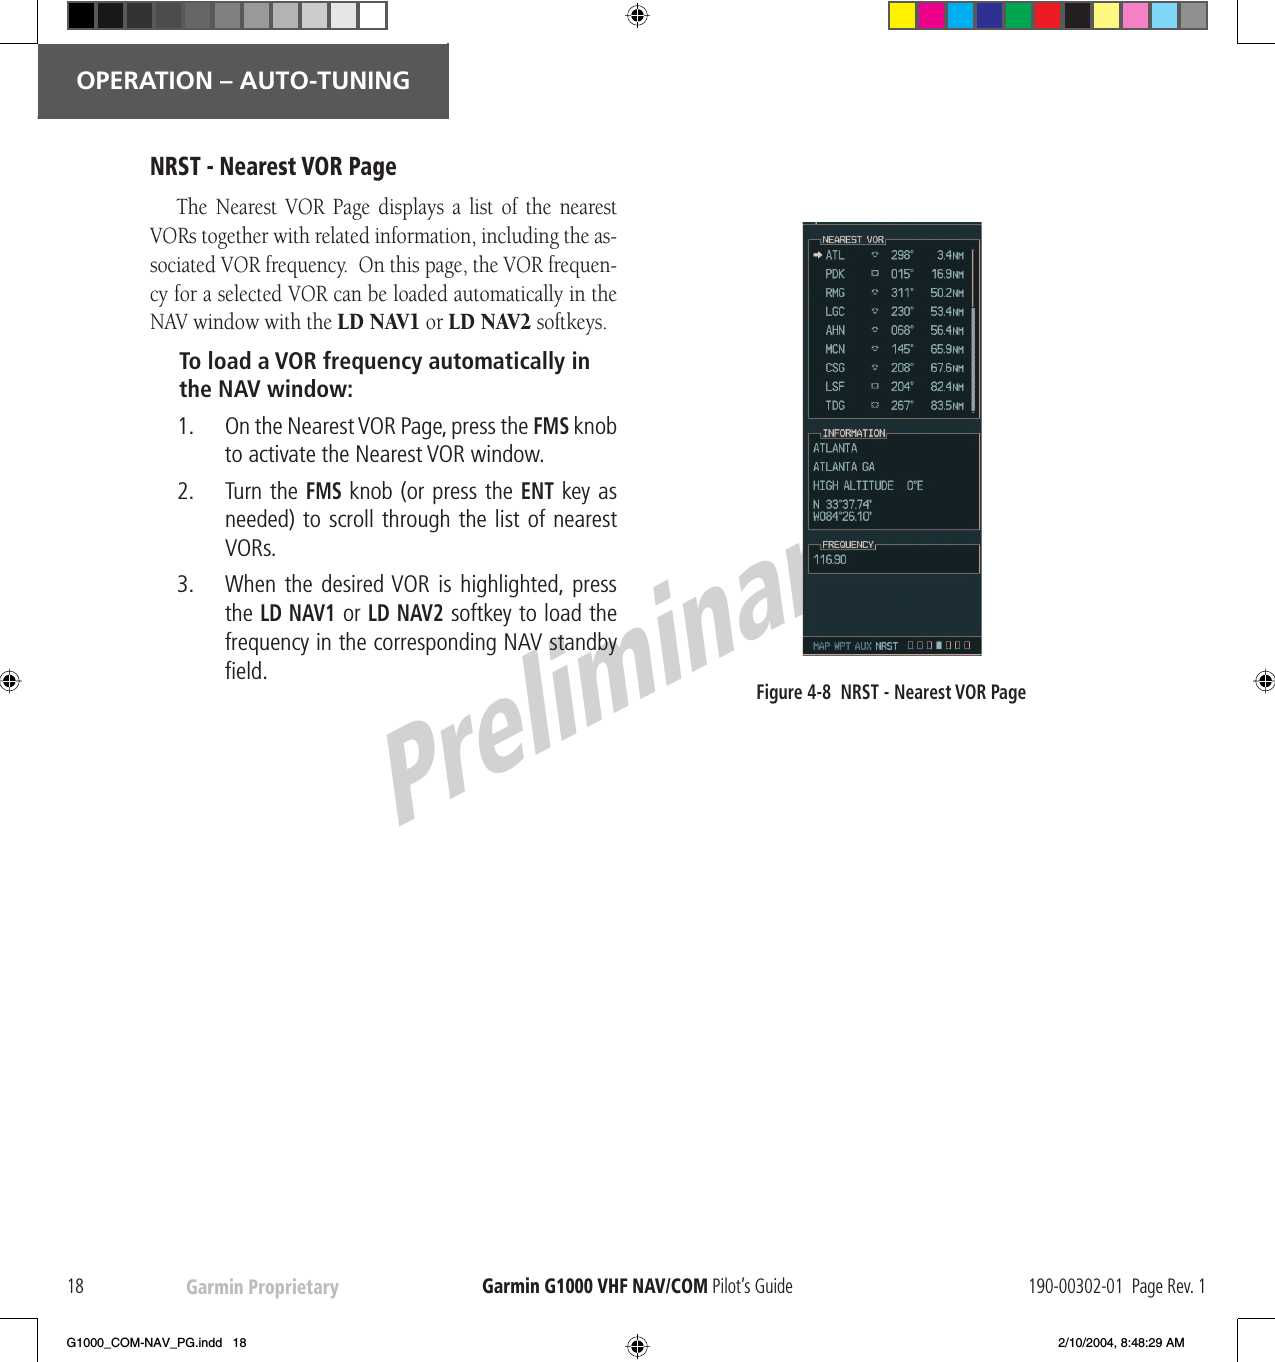 PreliminaryGarmin Proprietary18OPERATION – AUTO-TUNINGGarmin G1000  VHF NAV/COM Pilot’s Guide 190-00302-01  Page Rev. 1NRST - Nearest  VOR PageThe Nearest  VOR Page displays a list of the nearest VORs together with related information, including the as-sociated  VOR frequency.  On this page, the  VOR frequen-cy for a selected  VOR can be loaded automatically in the NAV window with the  LD NAV1 or  LD NAV2 softkeys.To load a  VOR frequency automatically in the NAV window:1.     On the Nearest  VOR Page, press the  FMS knob to activate the Nearest  VOR window.2.     Turn the  FMS knob (or press the ENT key as needed) to scroll through the list of nearest VORs.3.     When the  desired  VOR  is  highlighted, press the  LD NAV1 or  LD NAV2 softkey to load the frequency in the corresponding NAV  standby ﬁ eld.Figure 4-8  NRST - Nearest  VOR PageG1000_COM-NAV_PG.indd   18 2/10/2004, 8:48:29 AM